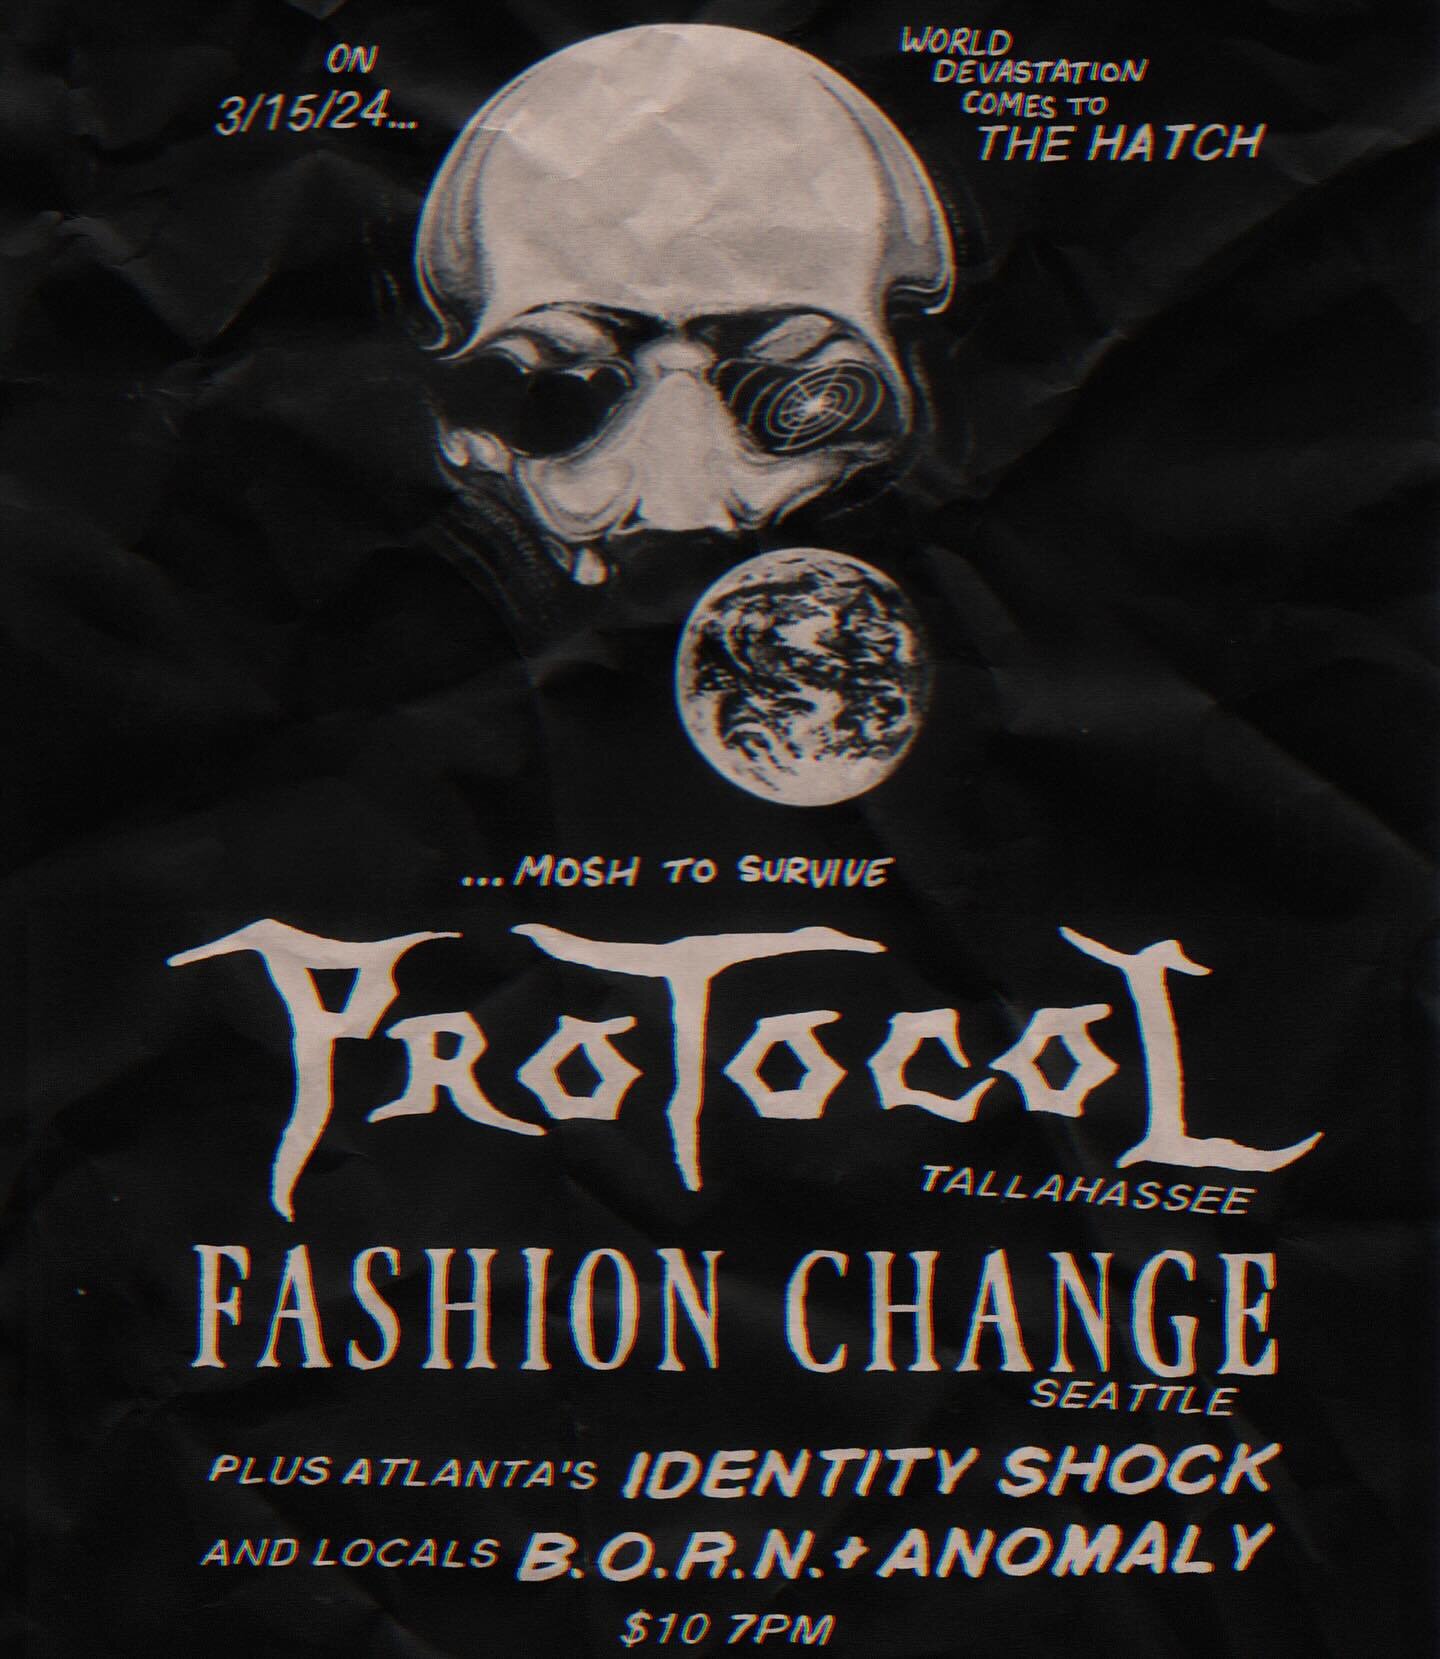 Insane stacked ass shit next month! I mean, come on. Protocol and Fashion Change coming thru on tour, Identity Shock stopping by, hometown heroes BORN and Anomaly. This is one for the books. God-tier hardcore punk entertainment at the hatch.